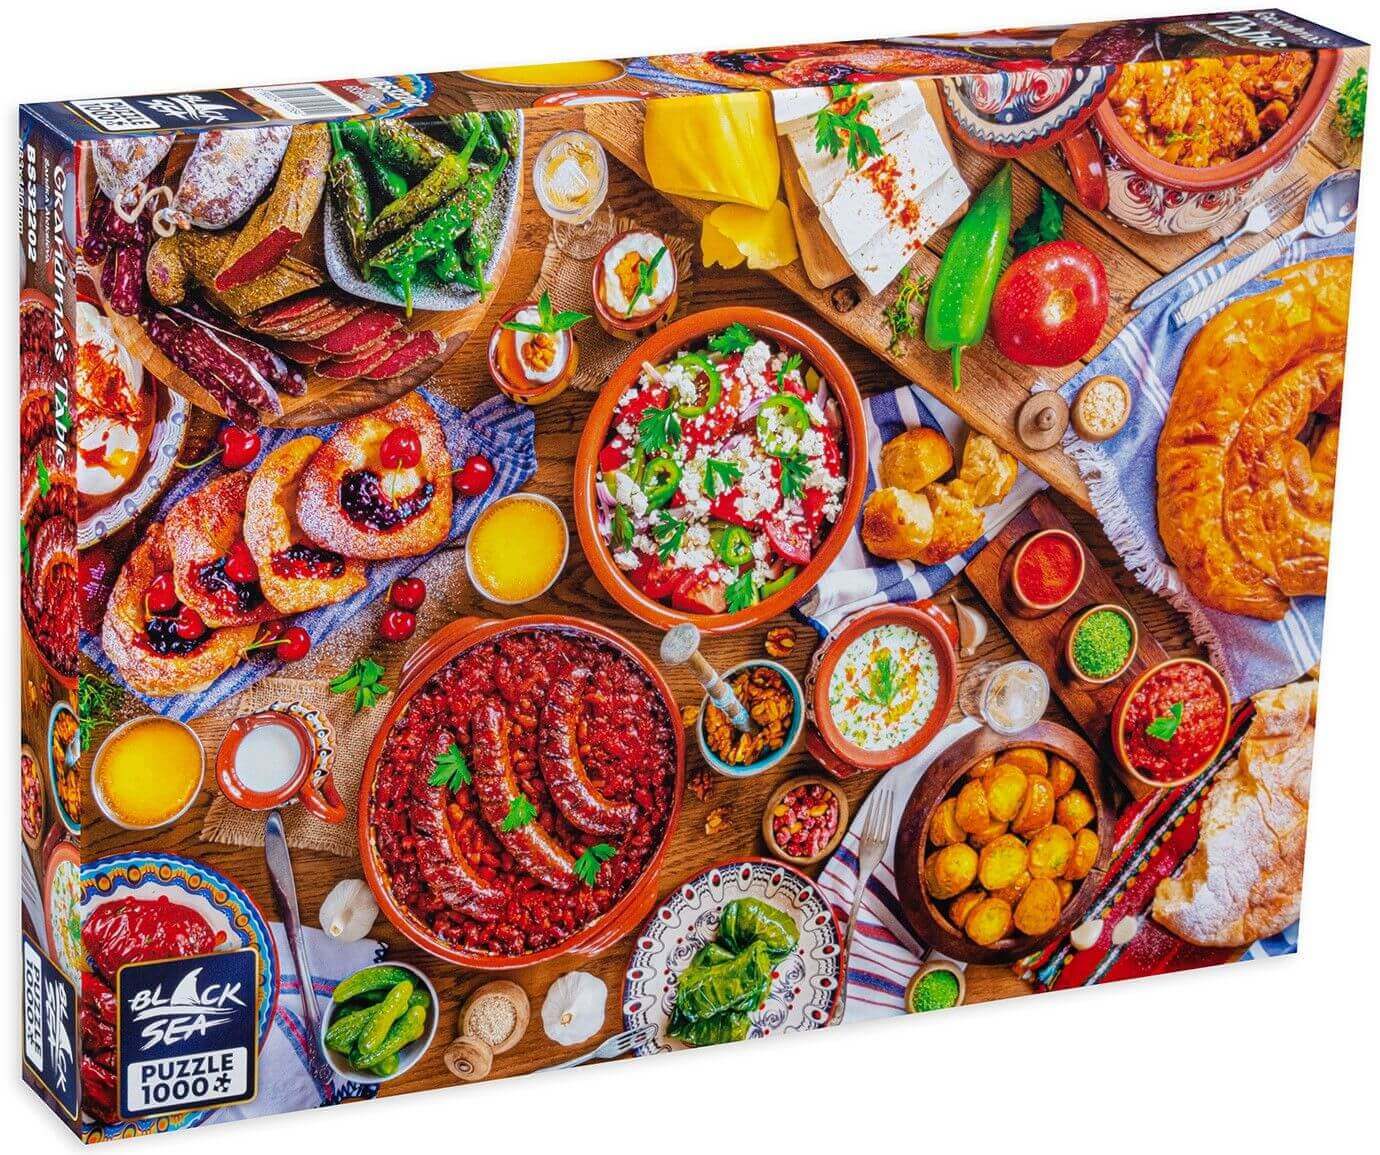 Puzzle Black Sea Premium 1000 pieces - Grandma's Table, Grandma’s table is cluttered with amazing dishes. The room is filled with an aroma of coziness and warmth. Banitsa, sarmi, stuffed peppers - all those traditional tastes that take us back to our chil